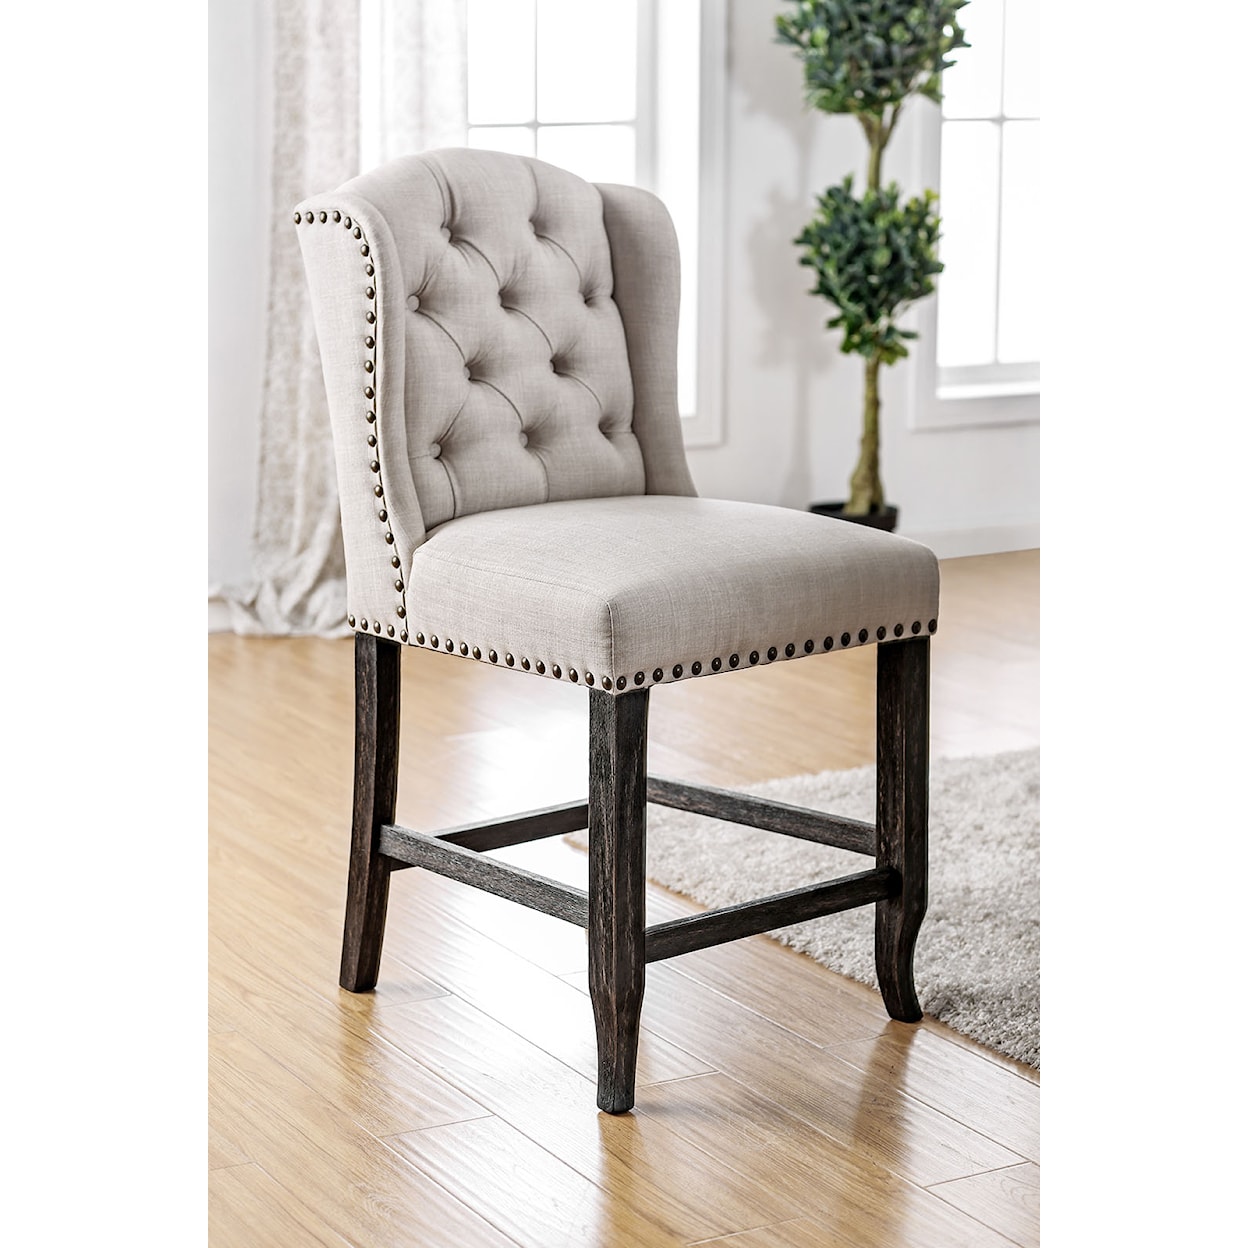 Furniture of America Sania III Wing Back Counter Height Chair